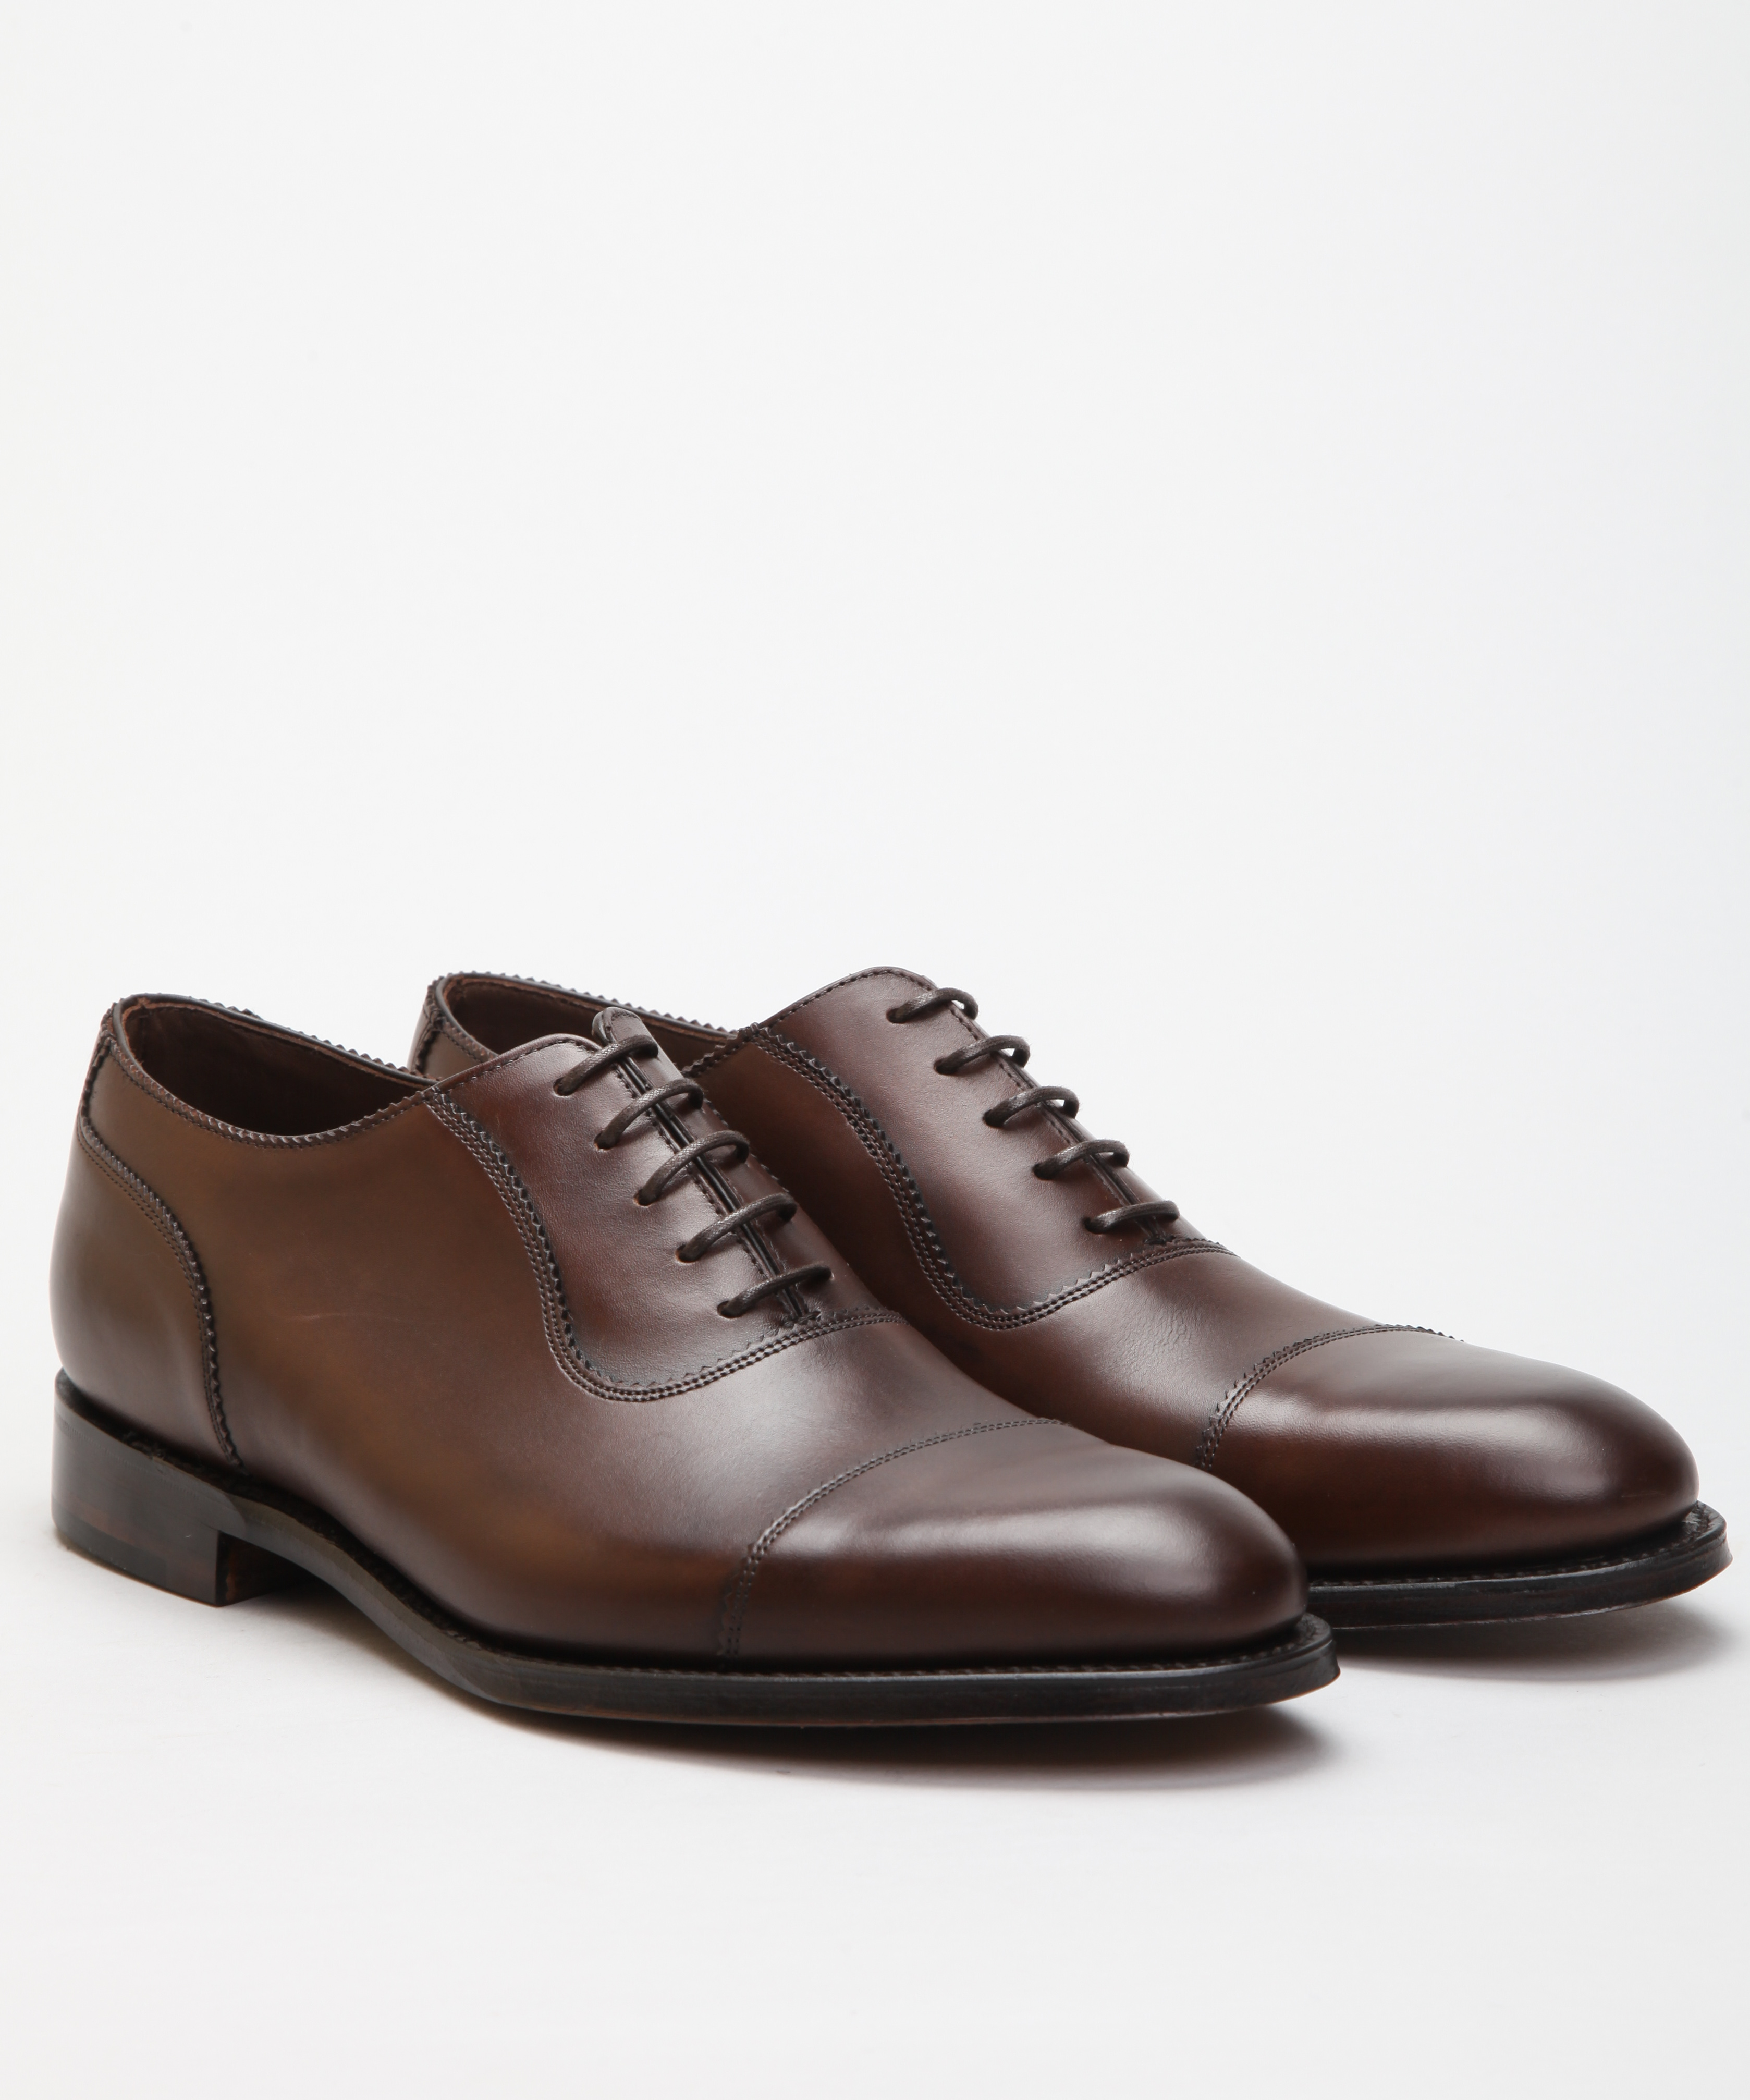 loake shoes usa off 62% - www 